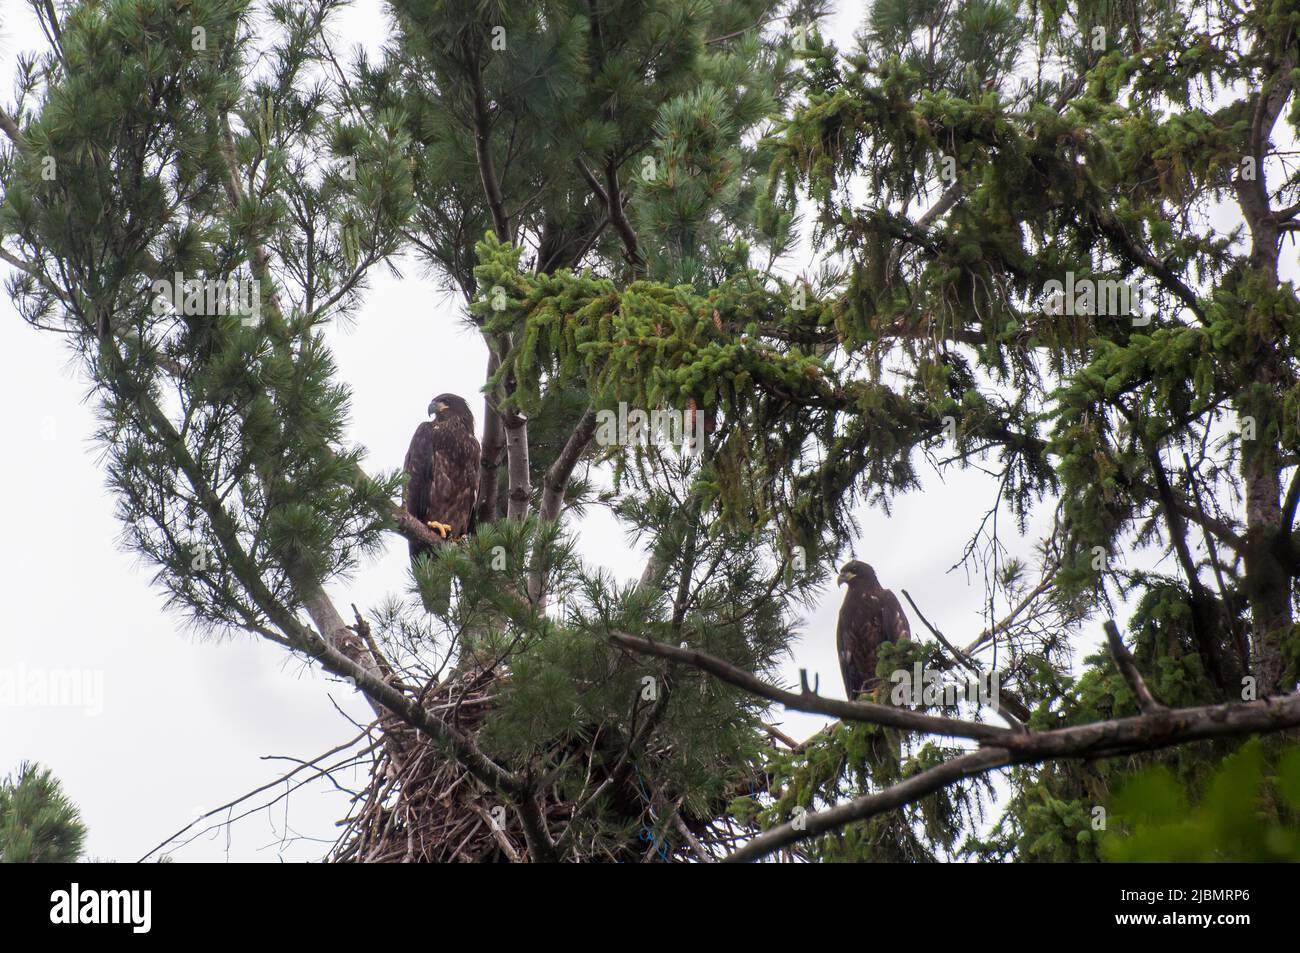 Vadnais Heights, Minnesota. John H. Allison forest. A pair of young bald eagle nestlings, Haliaeetus leucocephalus,  perched on a branch next to their Stock Photo